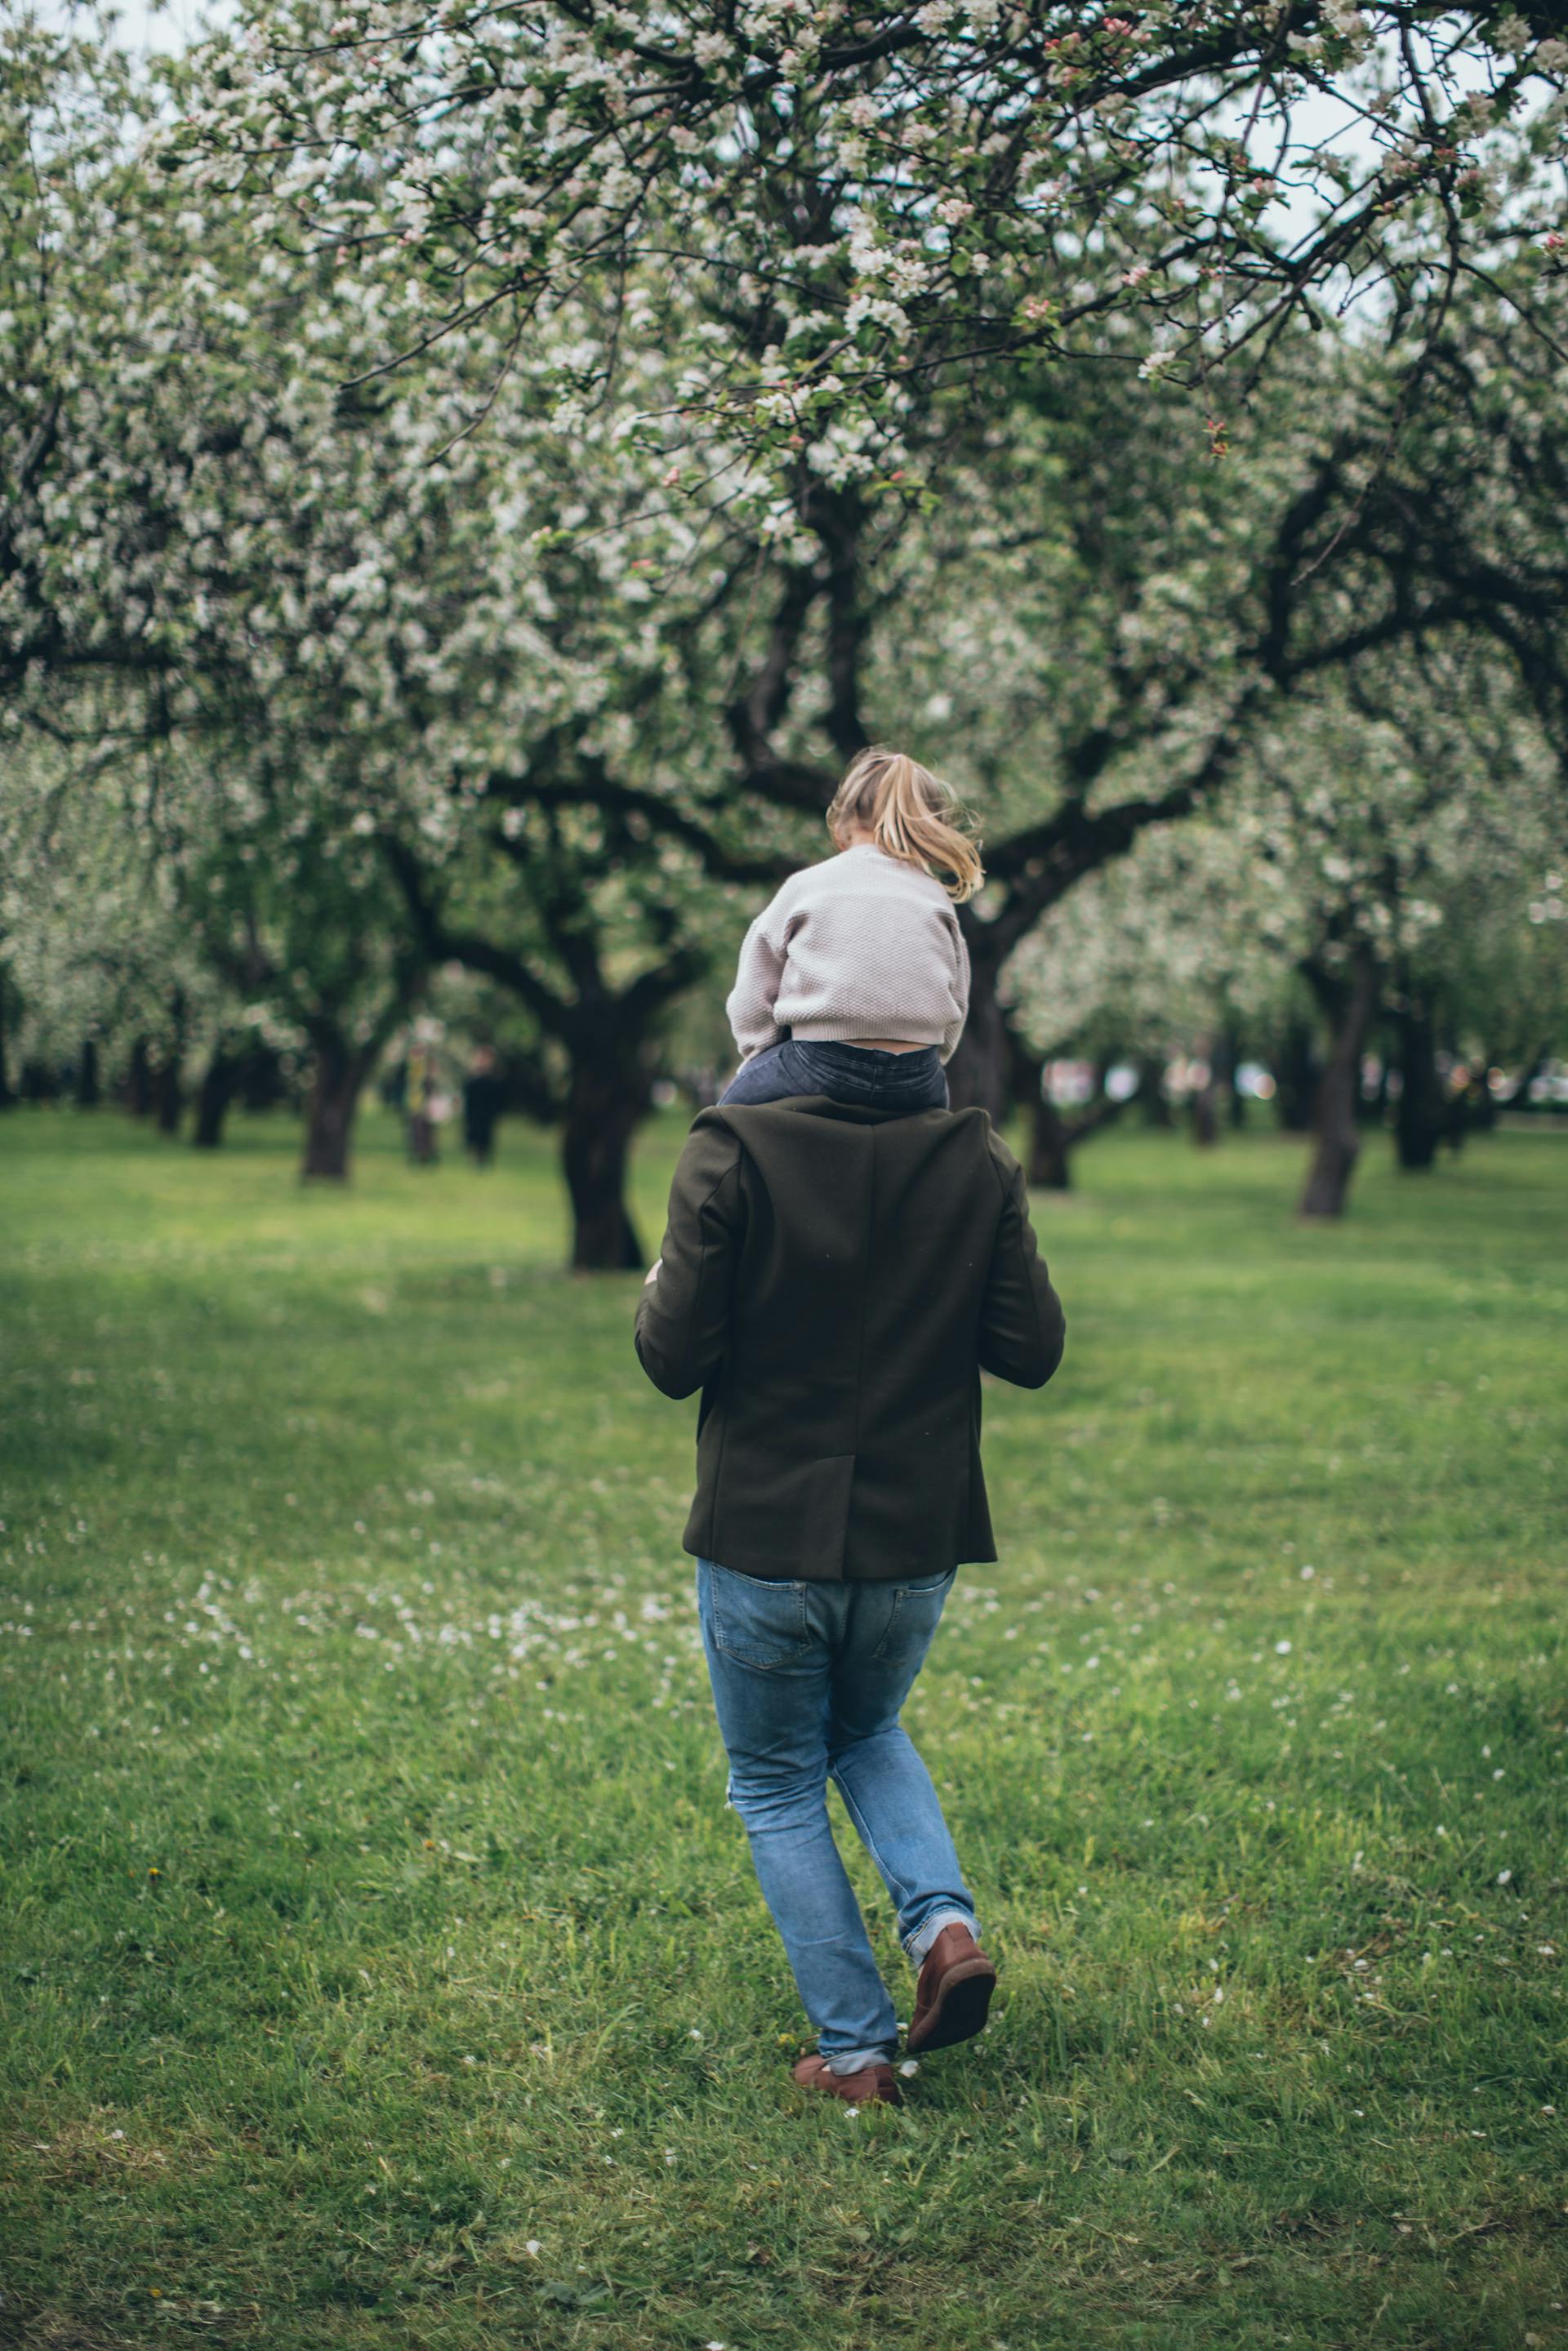 A man carrying his little daughter on his shoulders | Source: Pexels